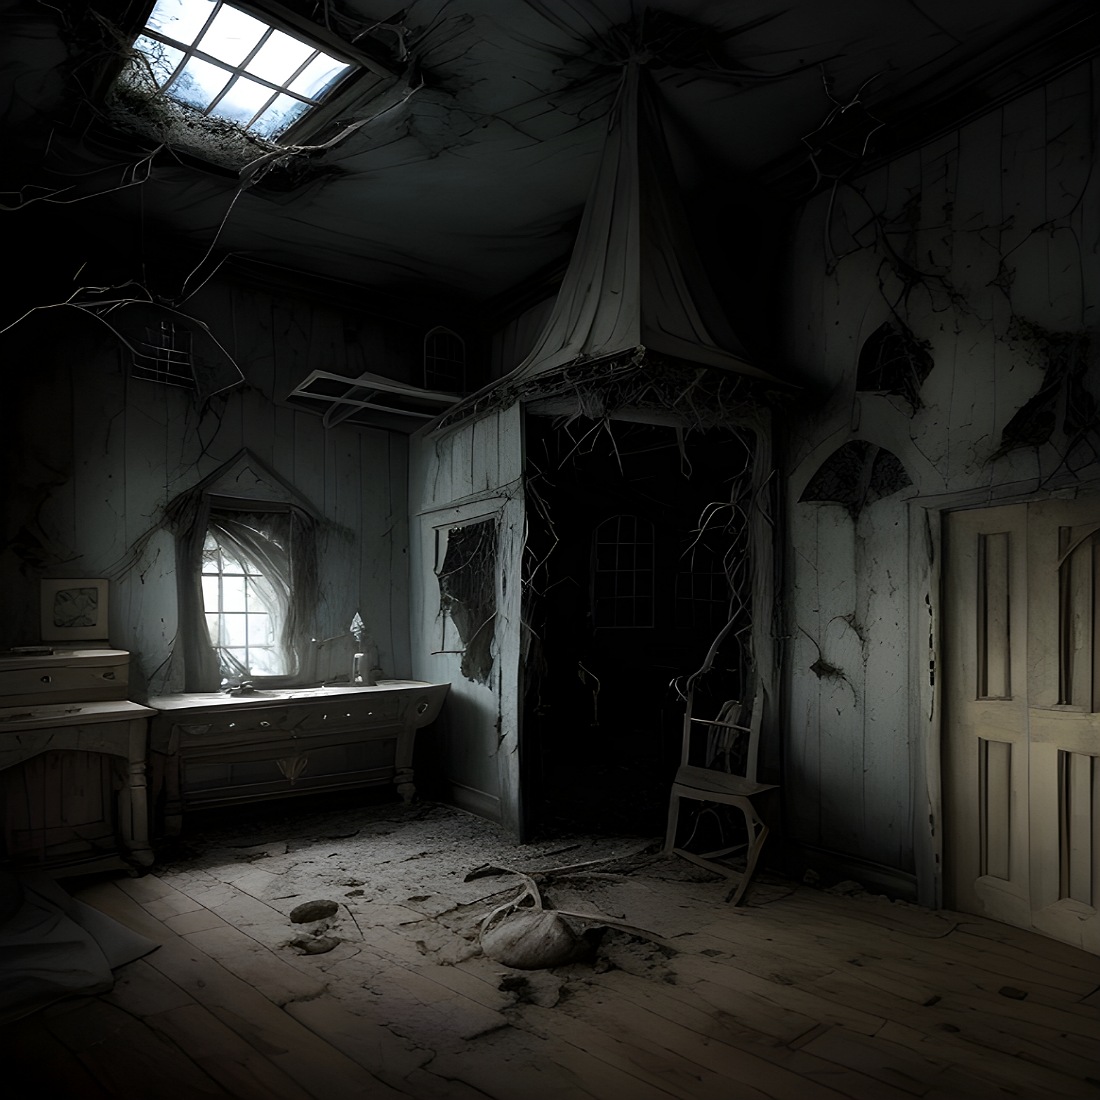 Spooky Hounted House cover image.